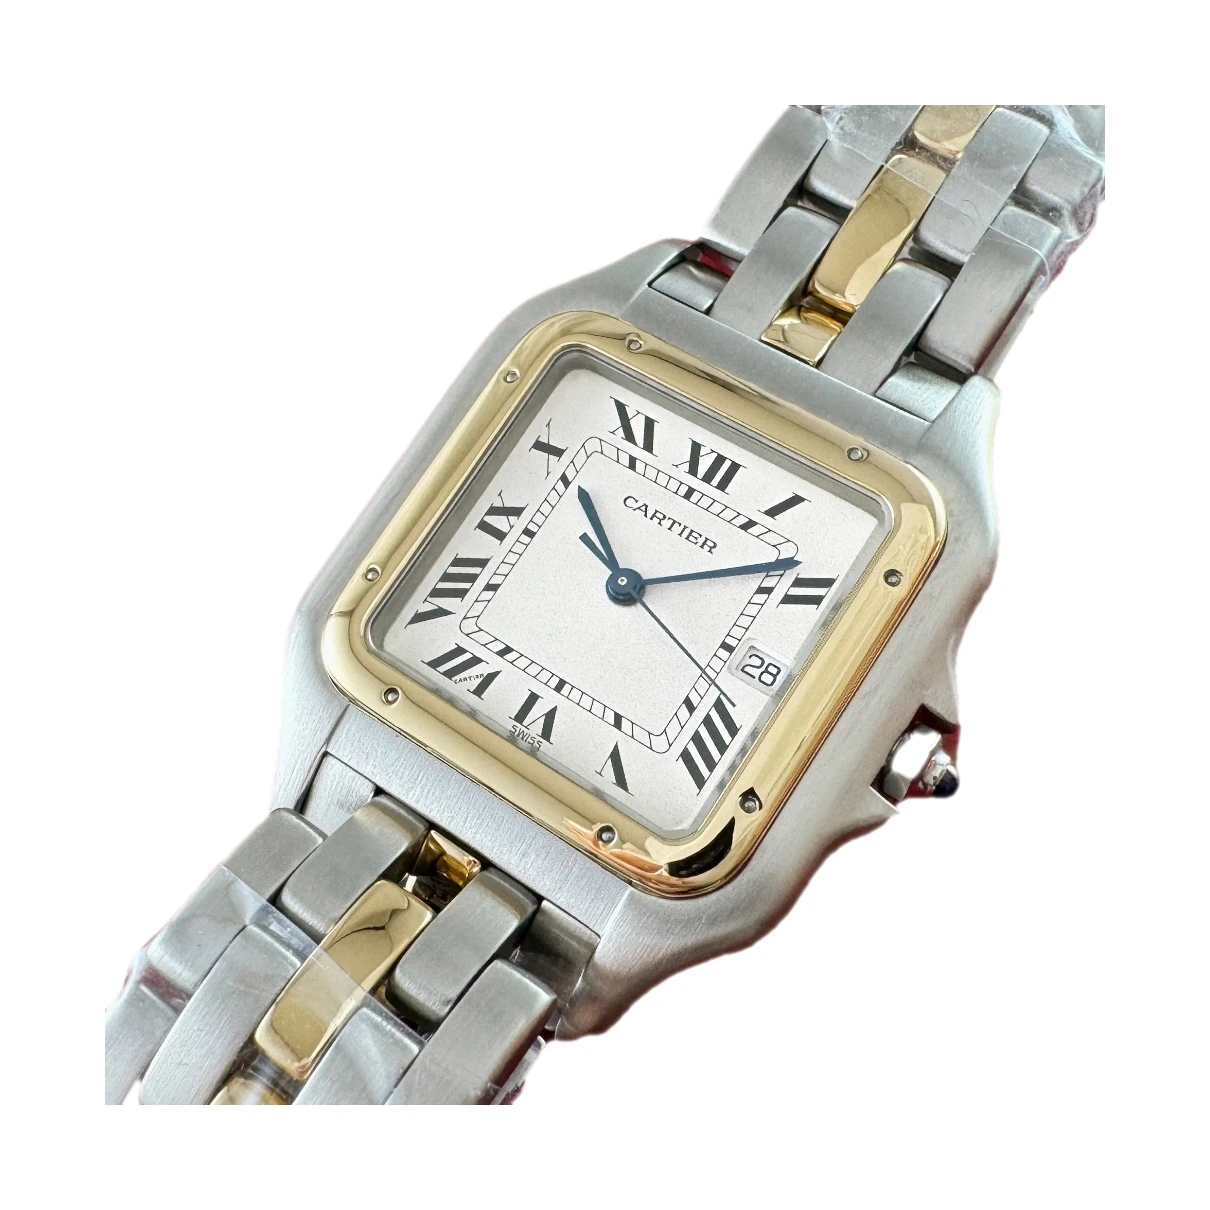 accessories Cartier watches Panthère for Male gold and steel. Used condition